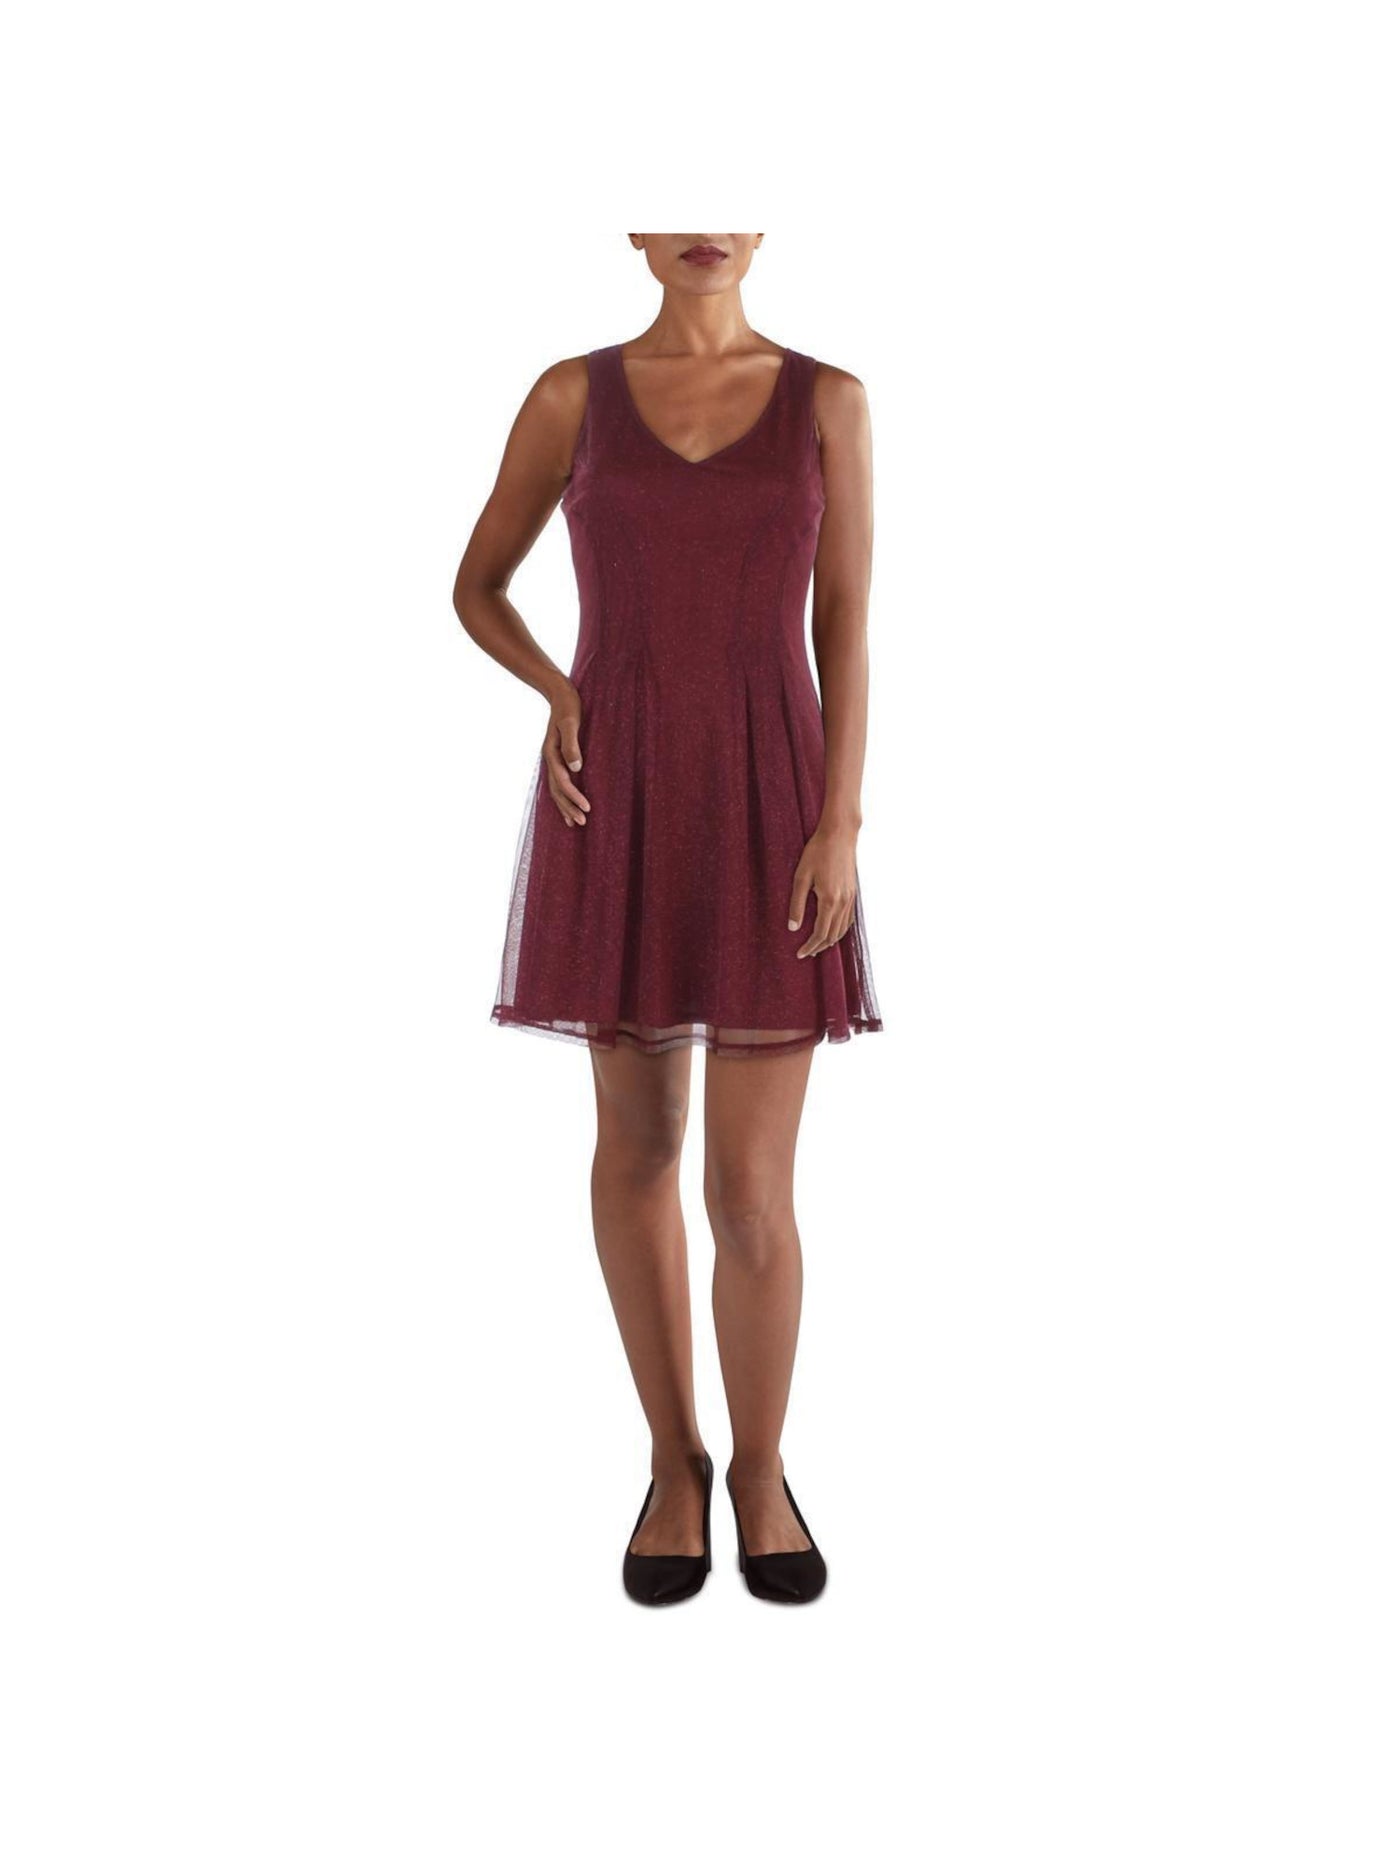 CITY STUDIO Womens Burgundy Stretch Zippered Pleated Lined Sleeveless V Neck Short Party Fit + Flare Dress Juniors 1